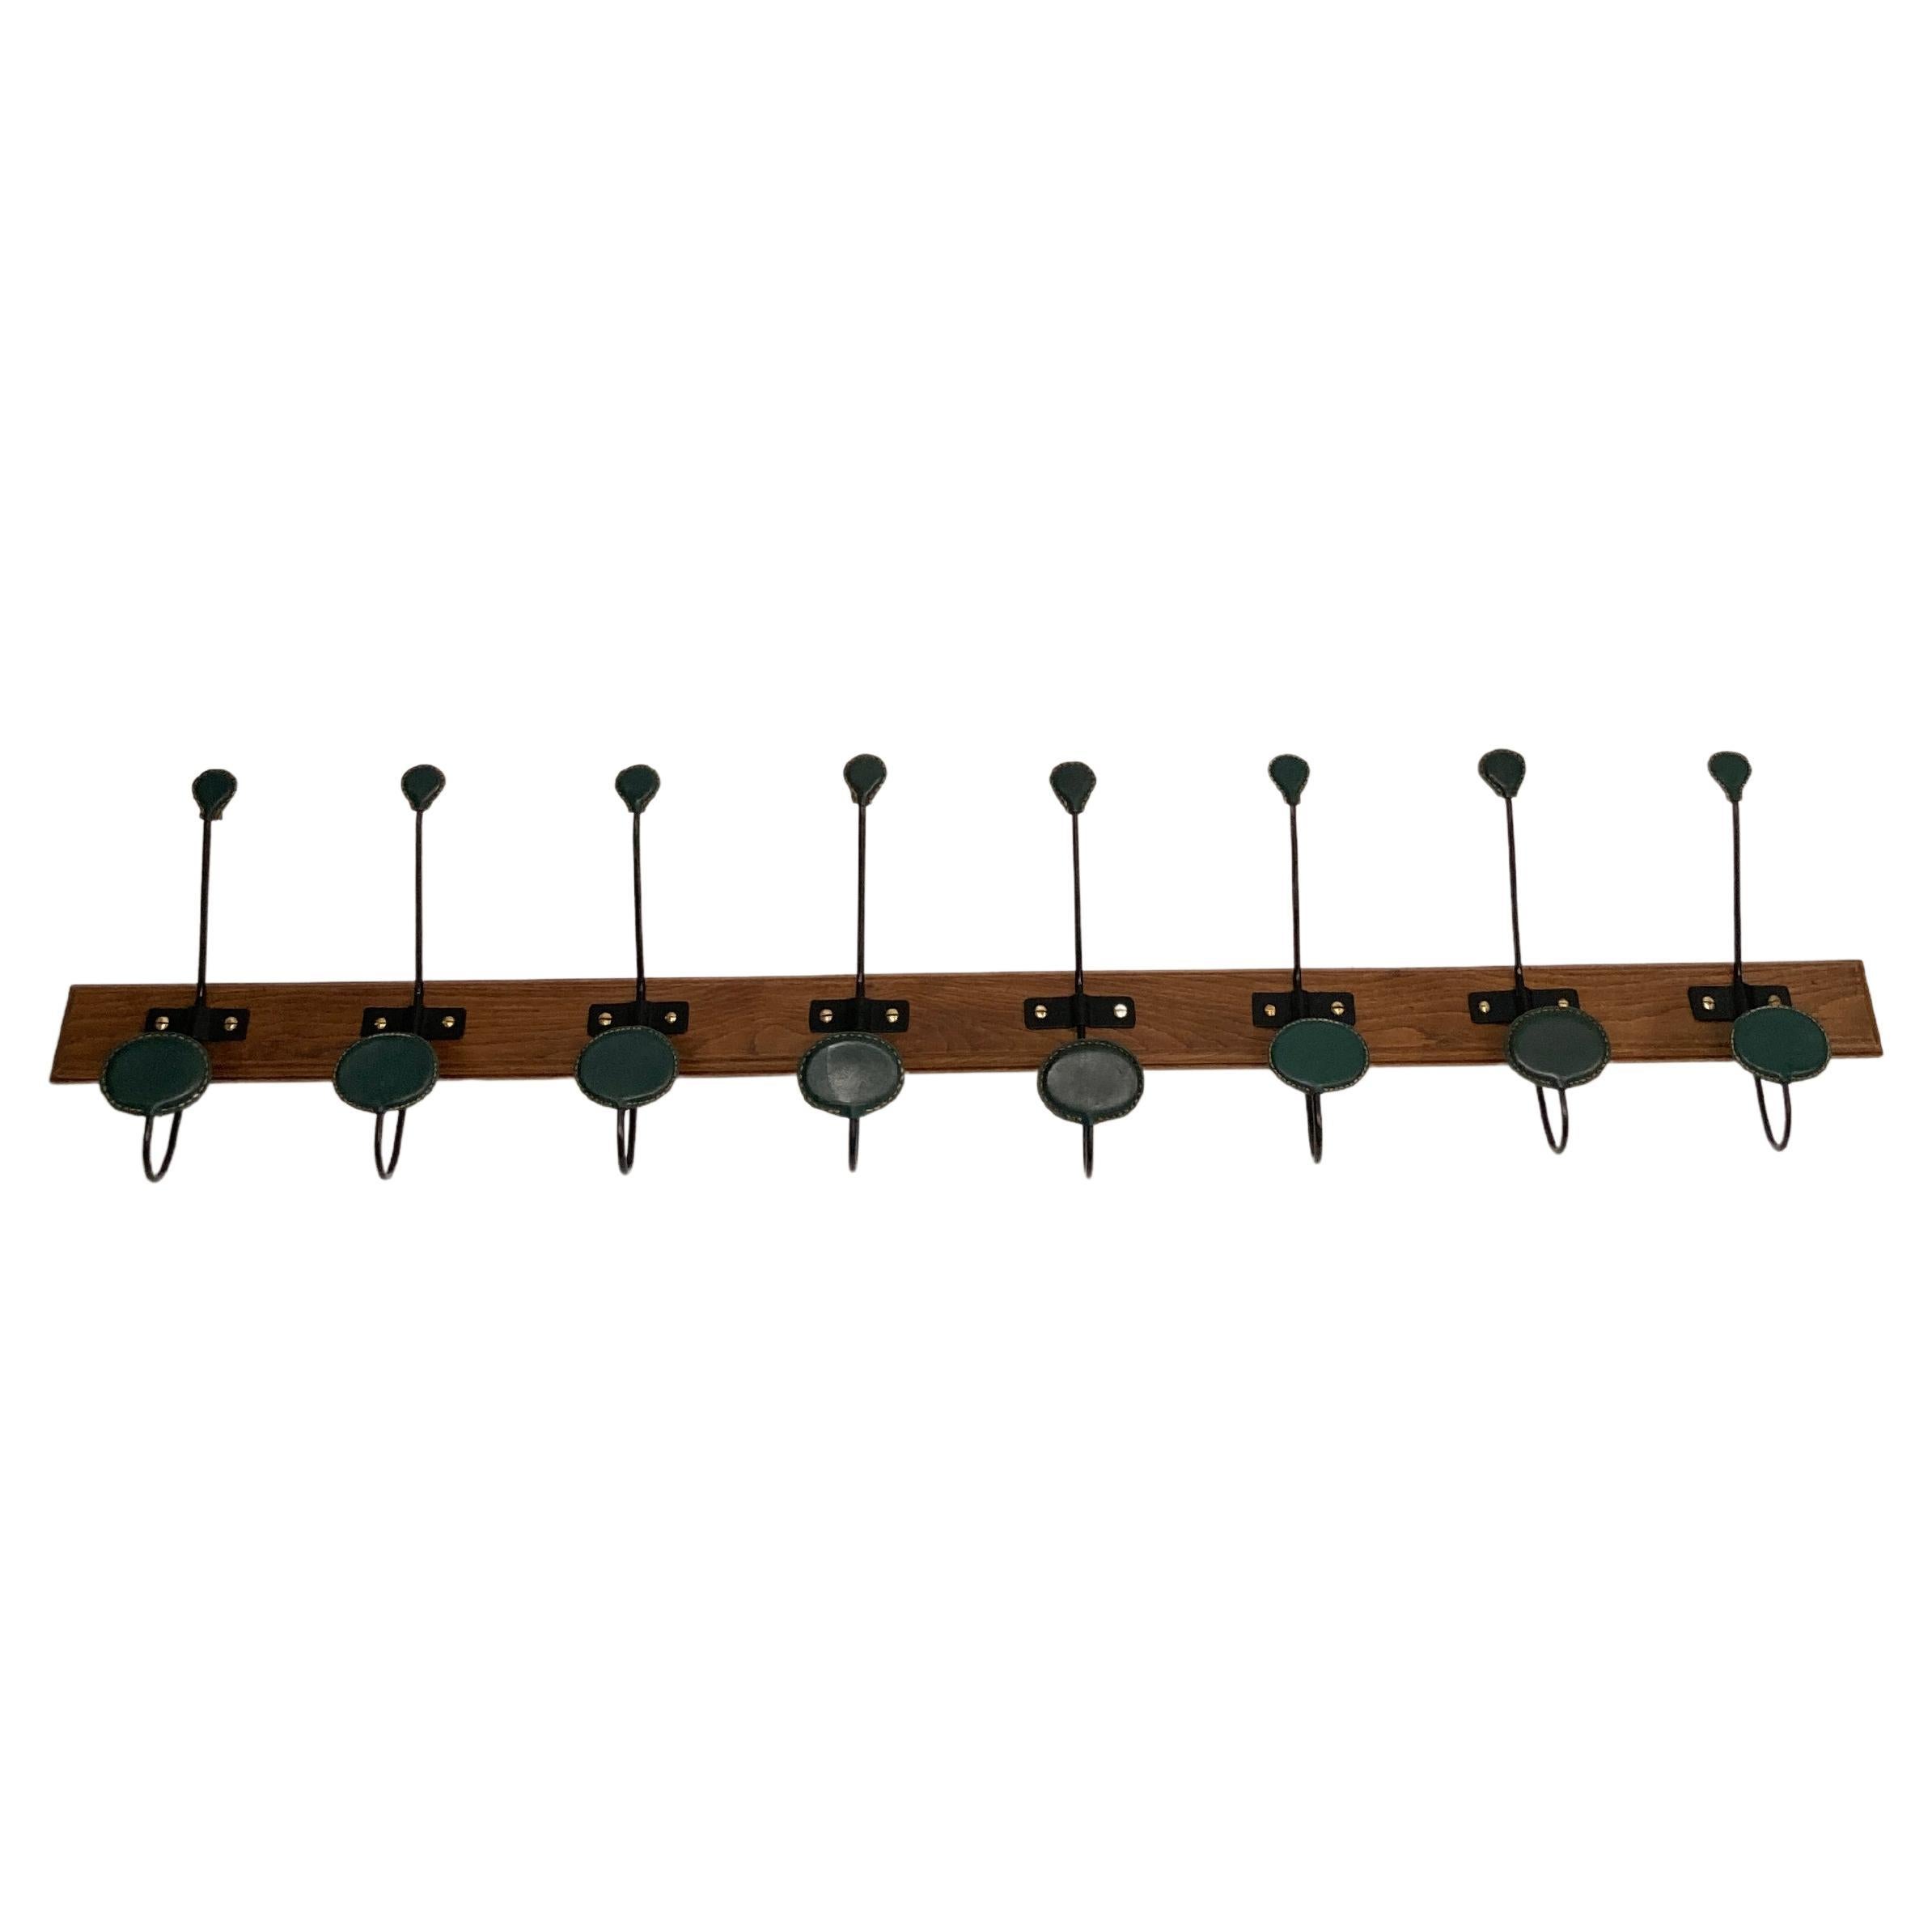 1950's Stitched leather wall coat rack by Jacques Adnet